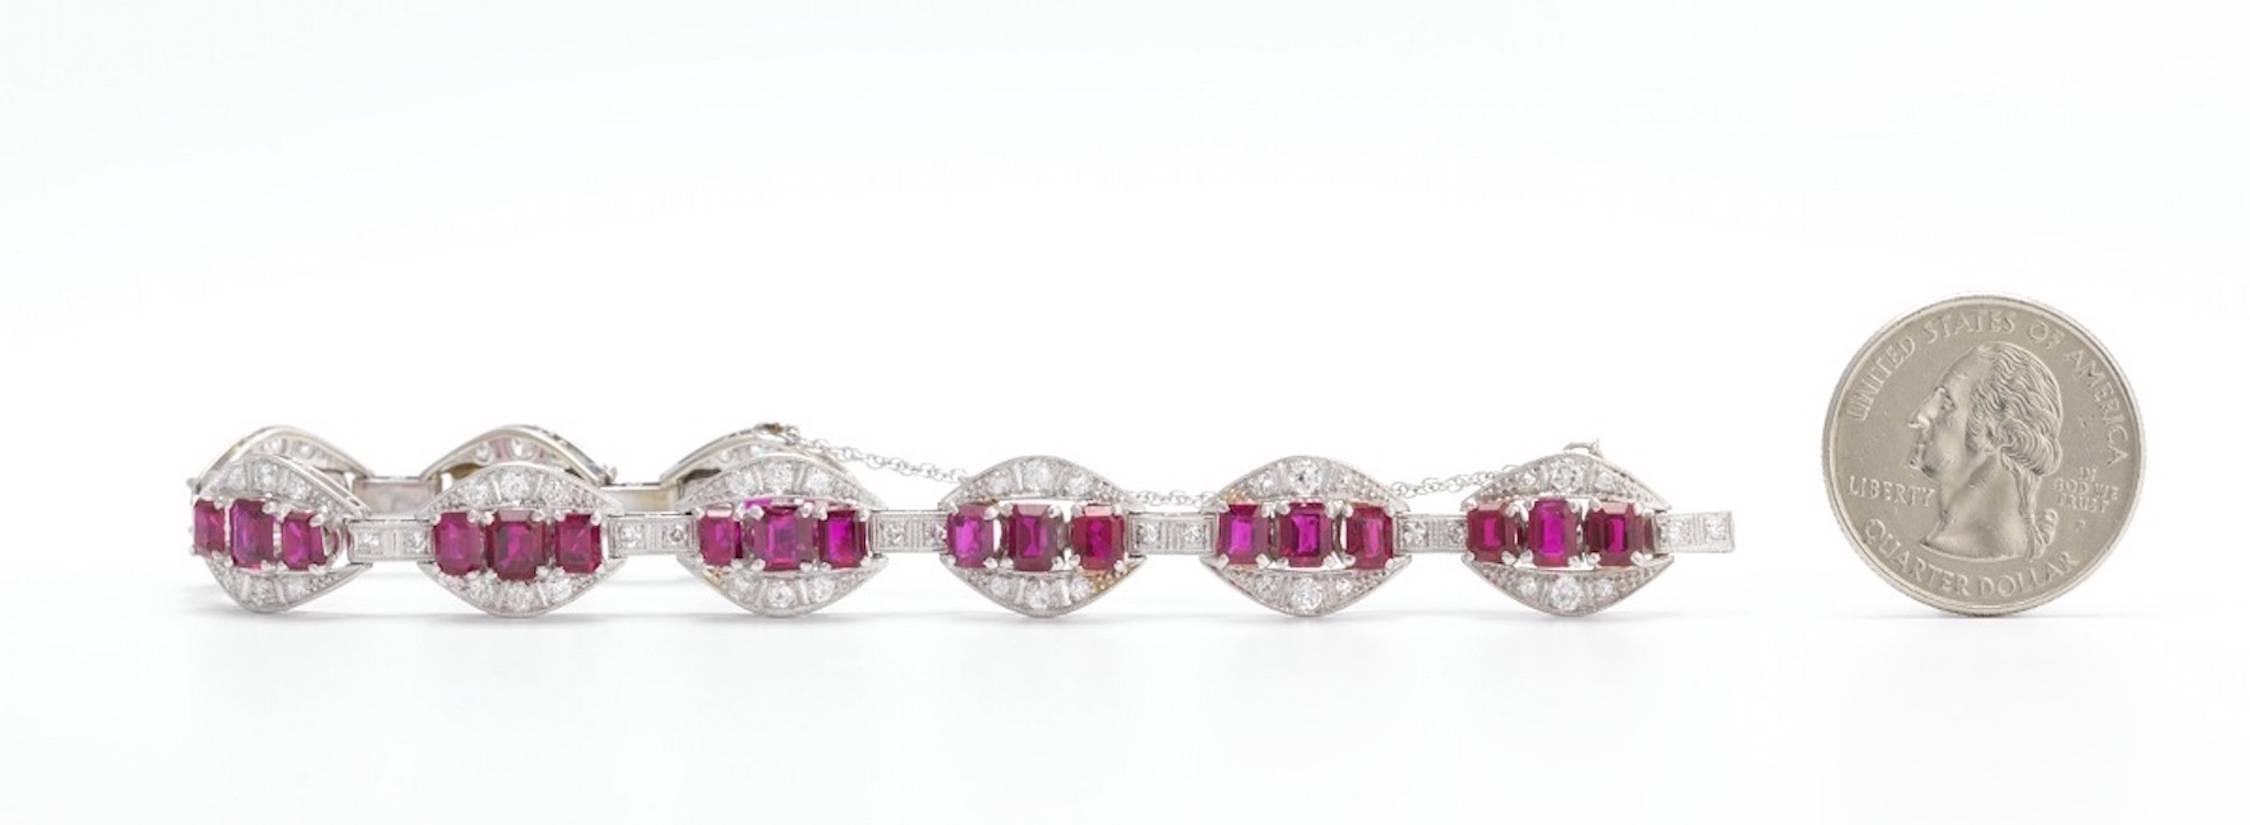 Stunning 1940s Art Deco 15 Carat Ruby and Diamond Bracelet In Excellent Condition For Sale In Shaker Heights, OH